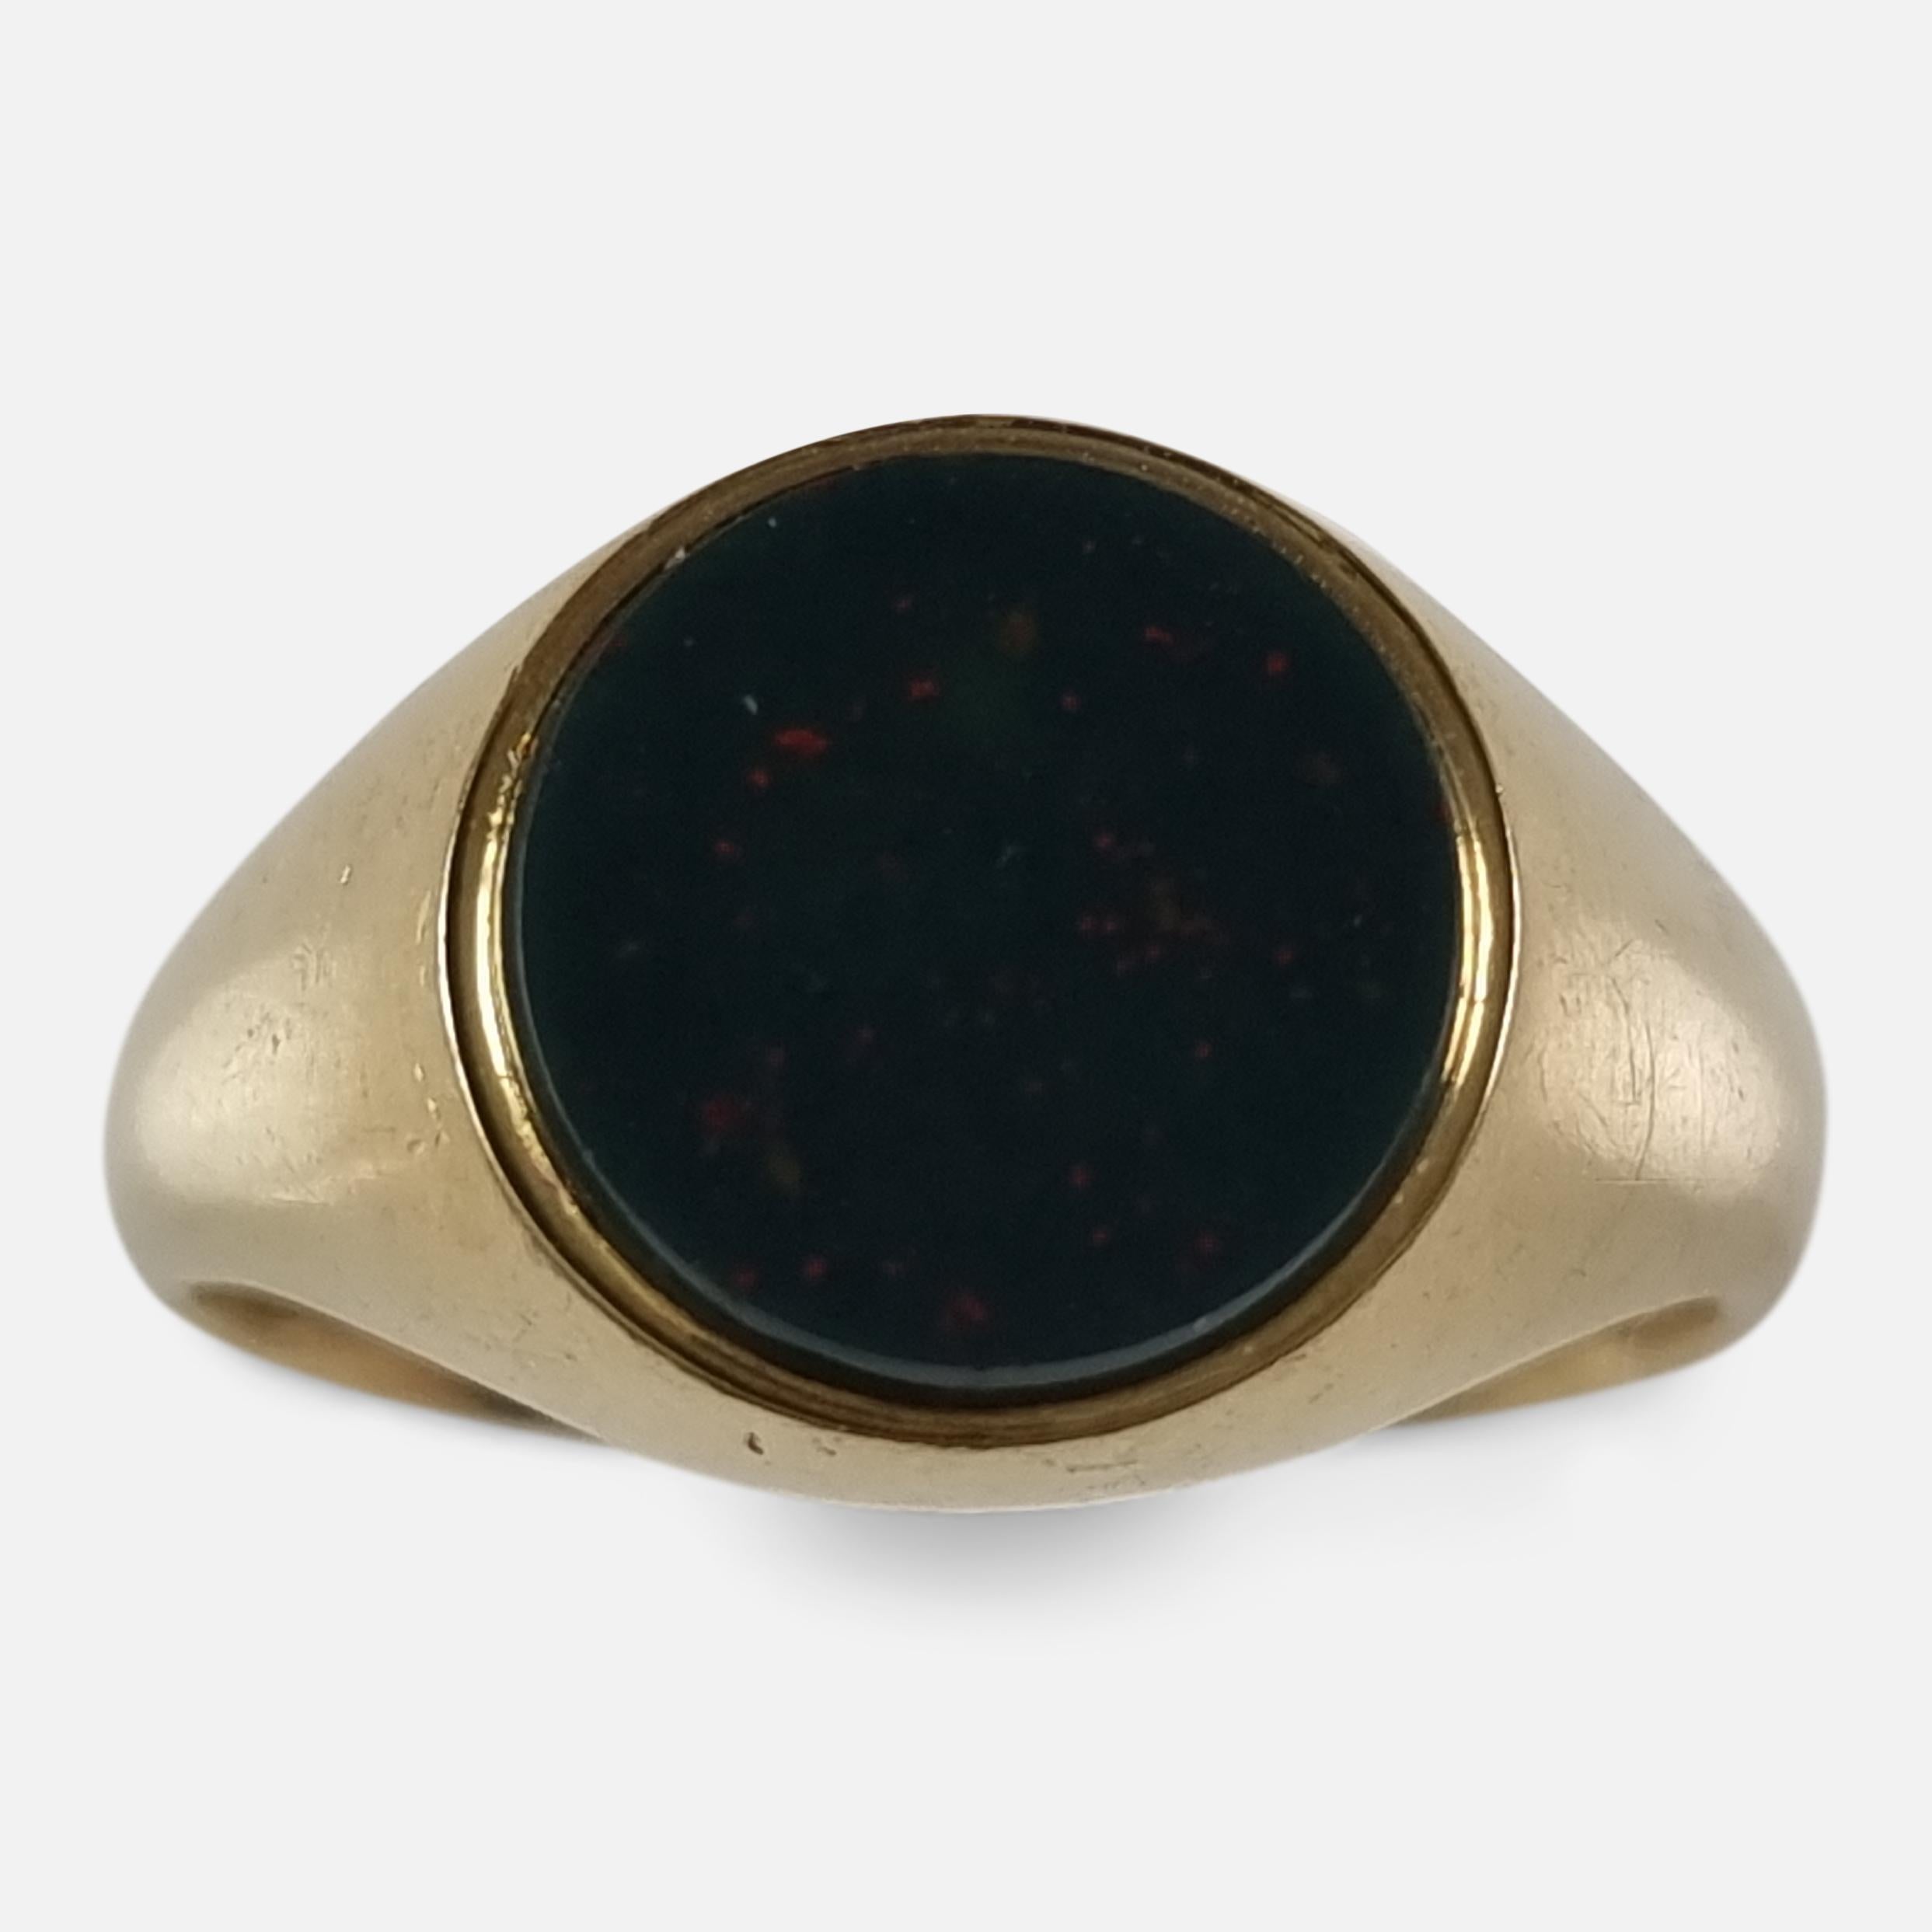 A George V 18ct yellow gold round bloodstone signet ring.

The ring is hallmarked with Chester assay office marks, date letter 'R' to denote 1917, and stamped '18' for 18 carat gold.

Period: - Early 20th century.

Date: - 1917.

Engraving: -